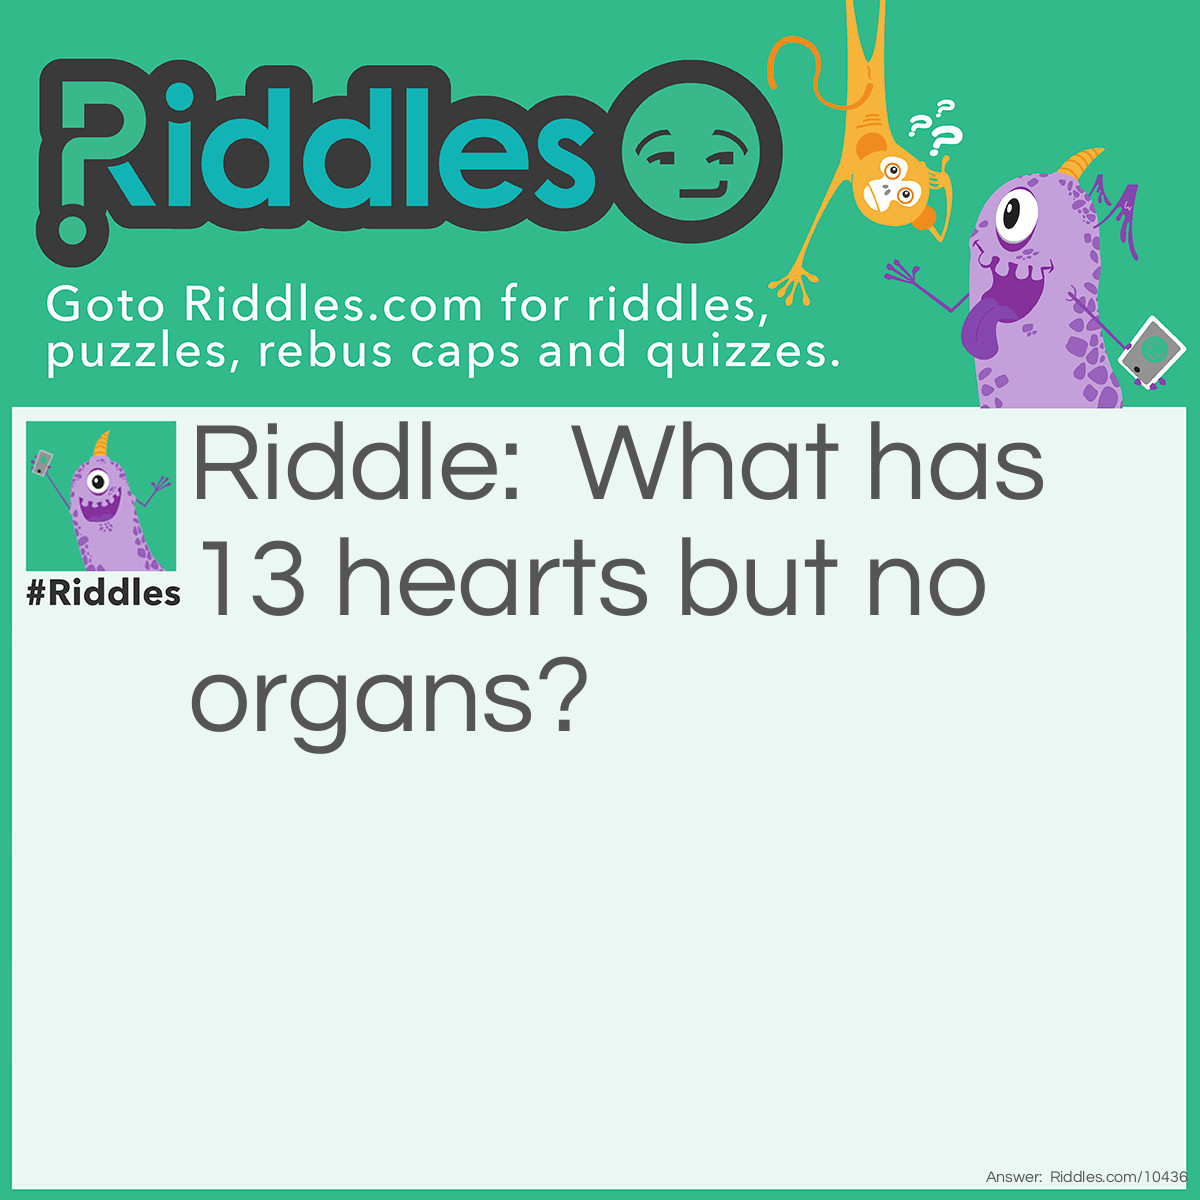 Riddle: What has 13 hearts but no organs? Answer: A deck of playing cards